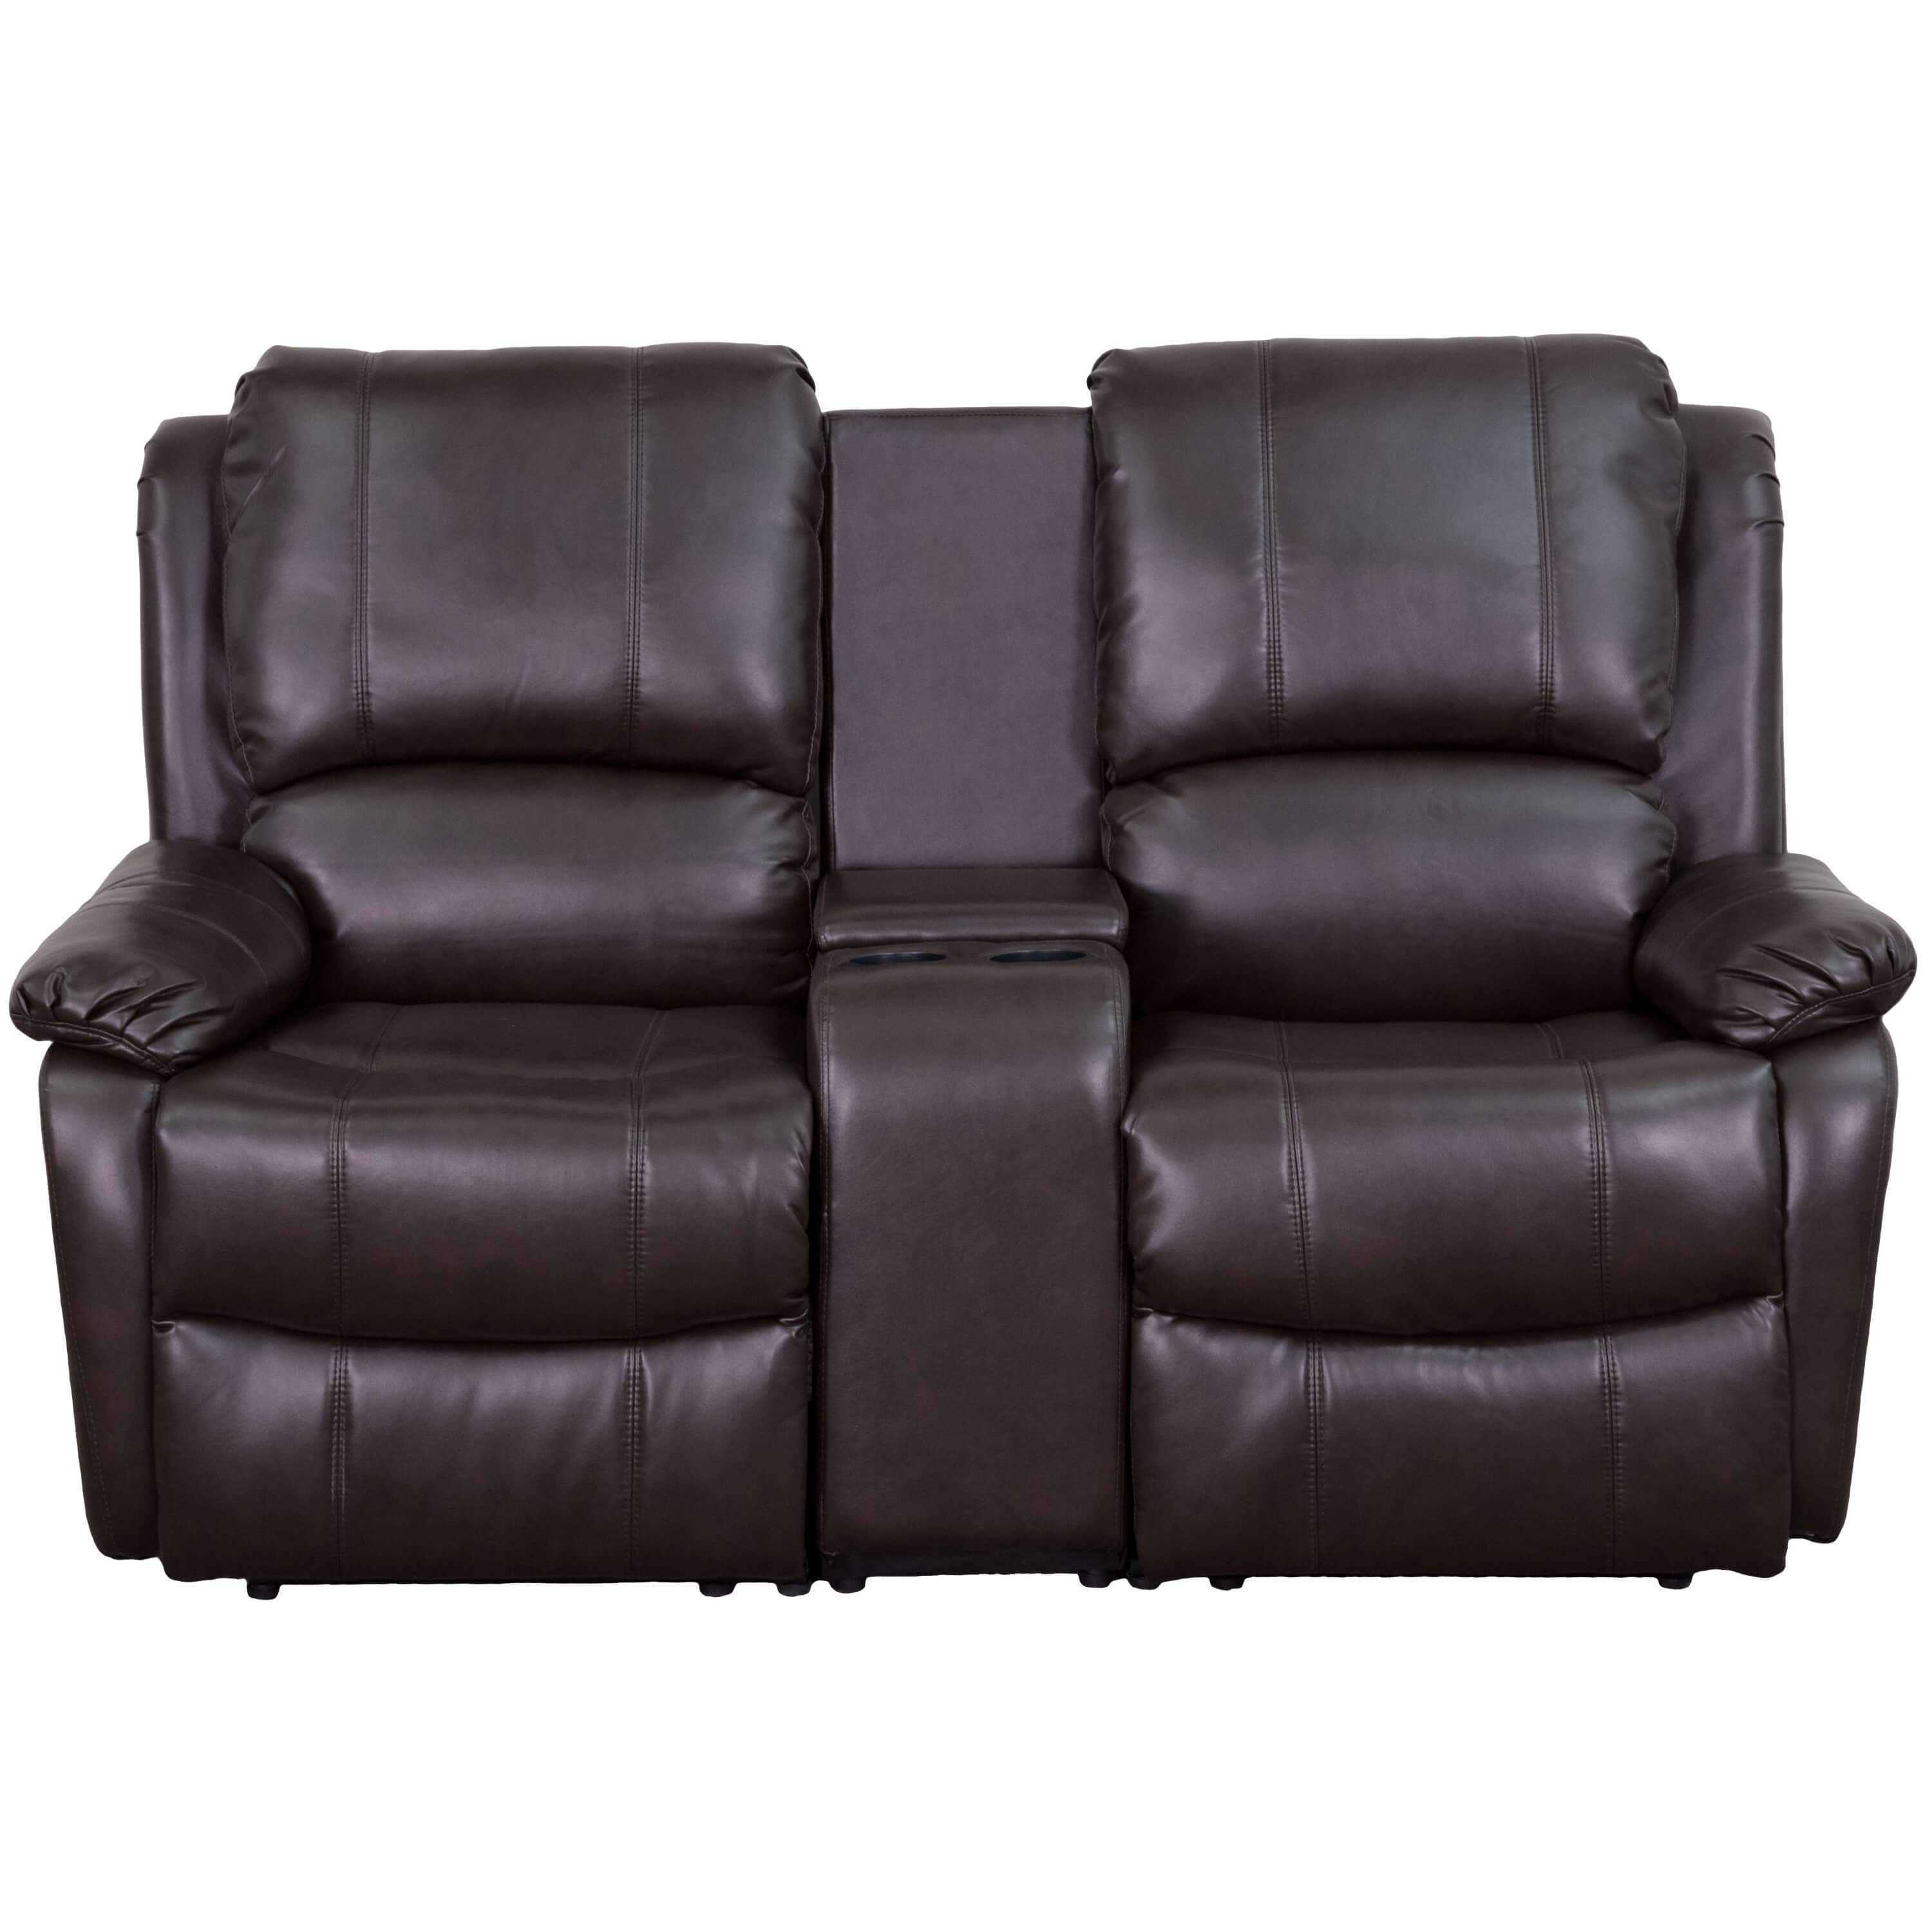 Recliner chair with cup holder front view